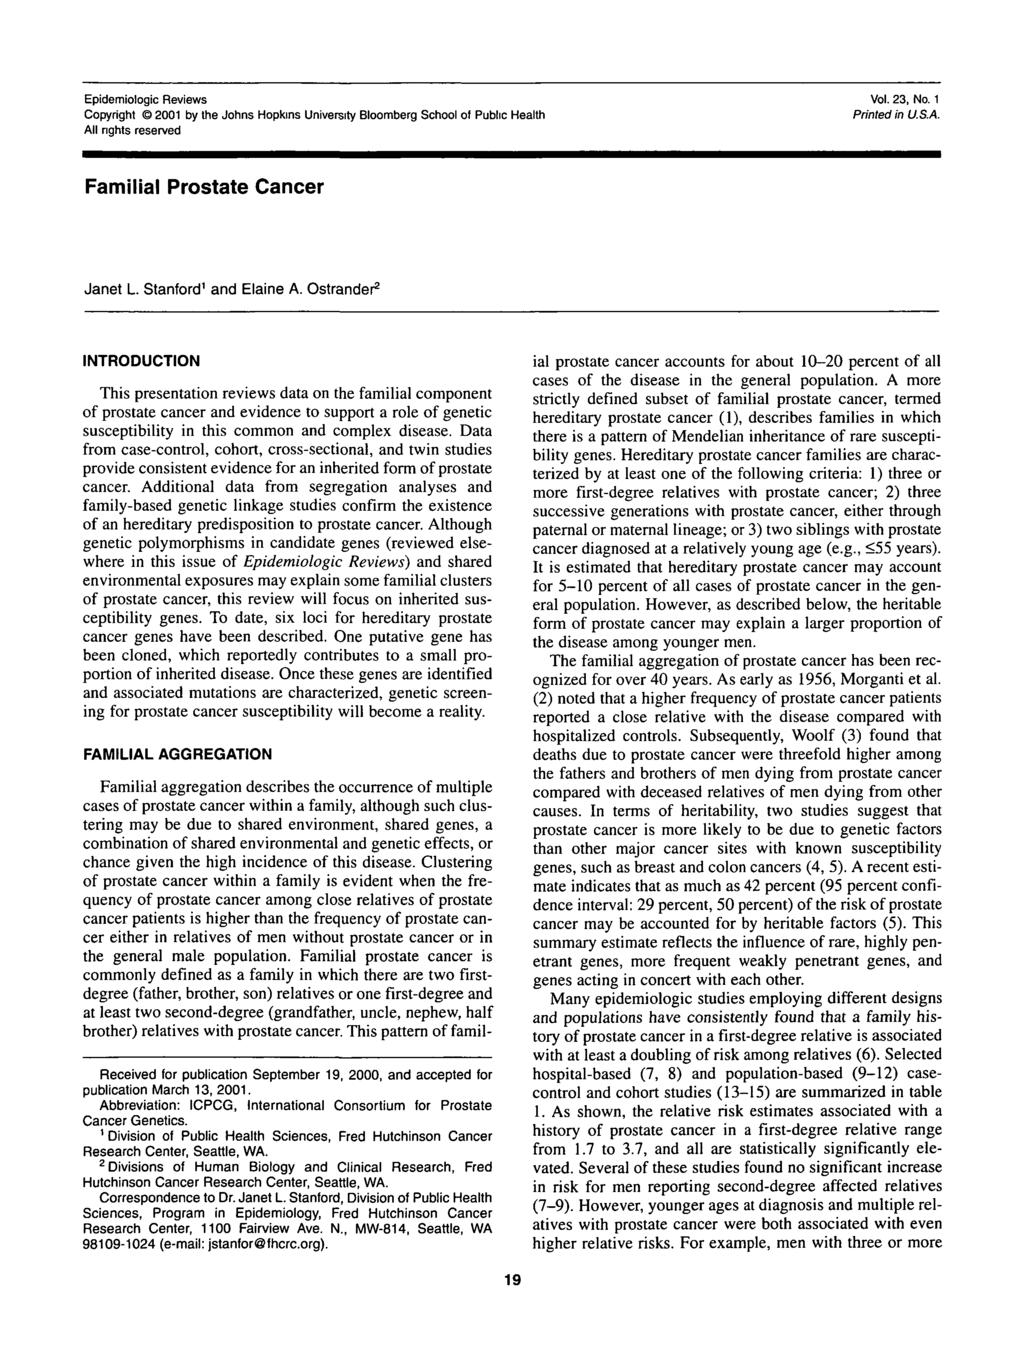 Epidemiologic Reviews Copyright 2001 by the Johns Hopkins University Bloomberg School of Public Health All rights reserved Vol. 23, No. 1 Printed in U.S.A. Familial Prostate Cancer Janet L.